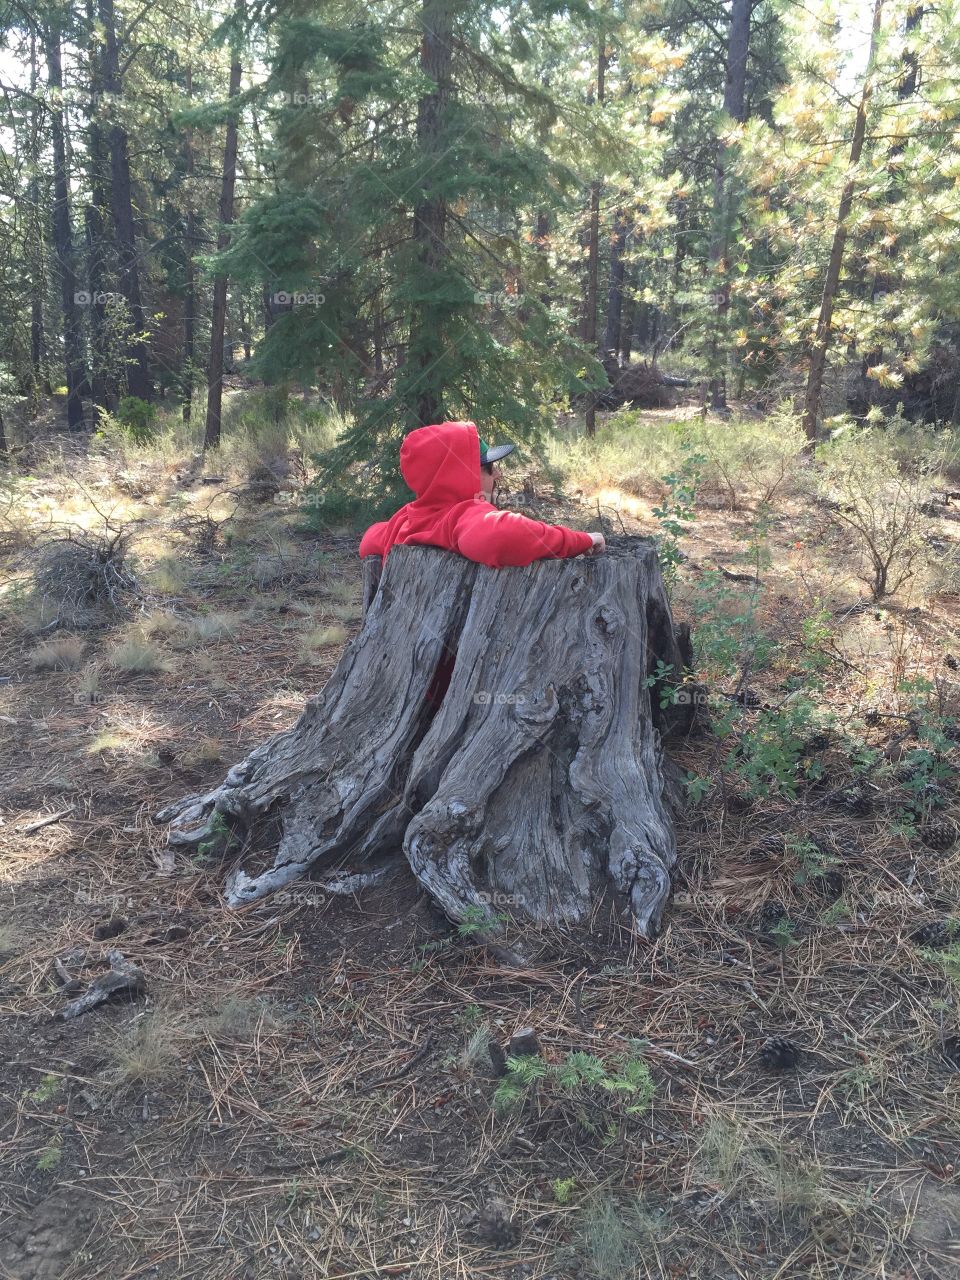 Man In a Tree Trunk. There was a man, a trail and a hollowed out pine tree. The man was tired, the stump served purpose. 